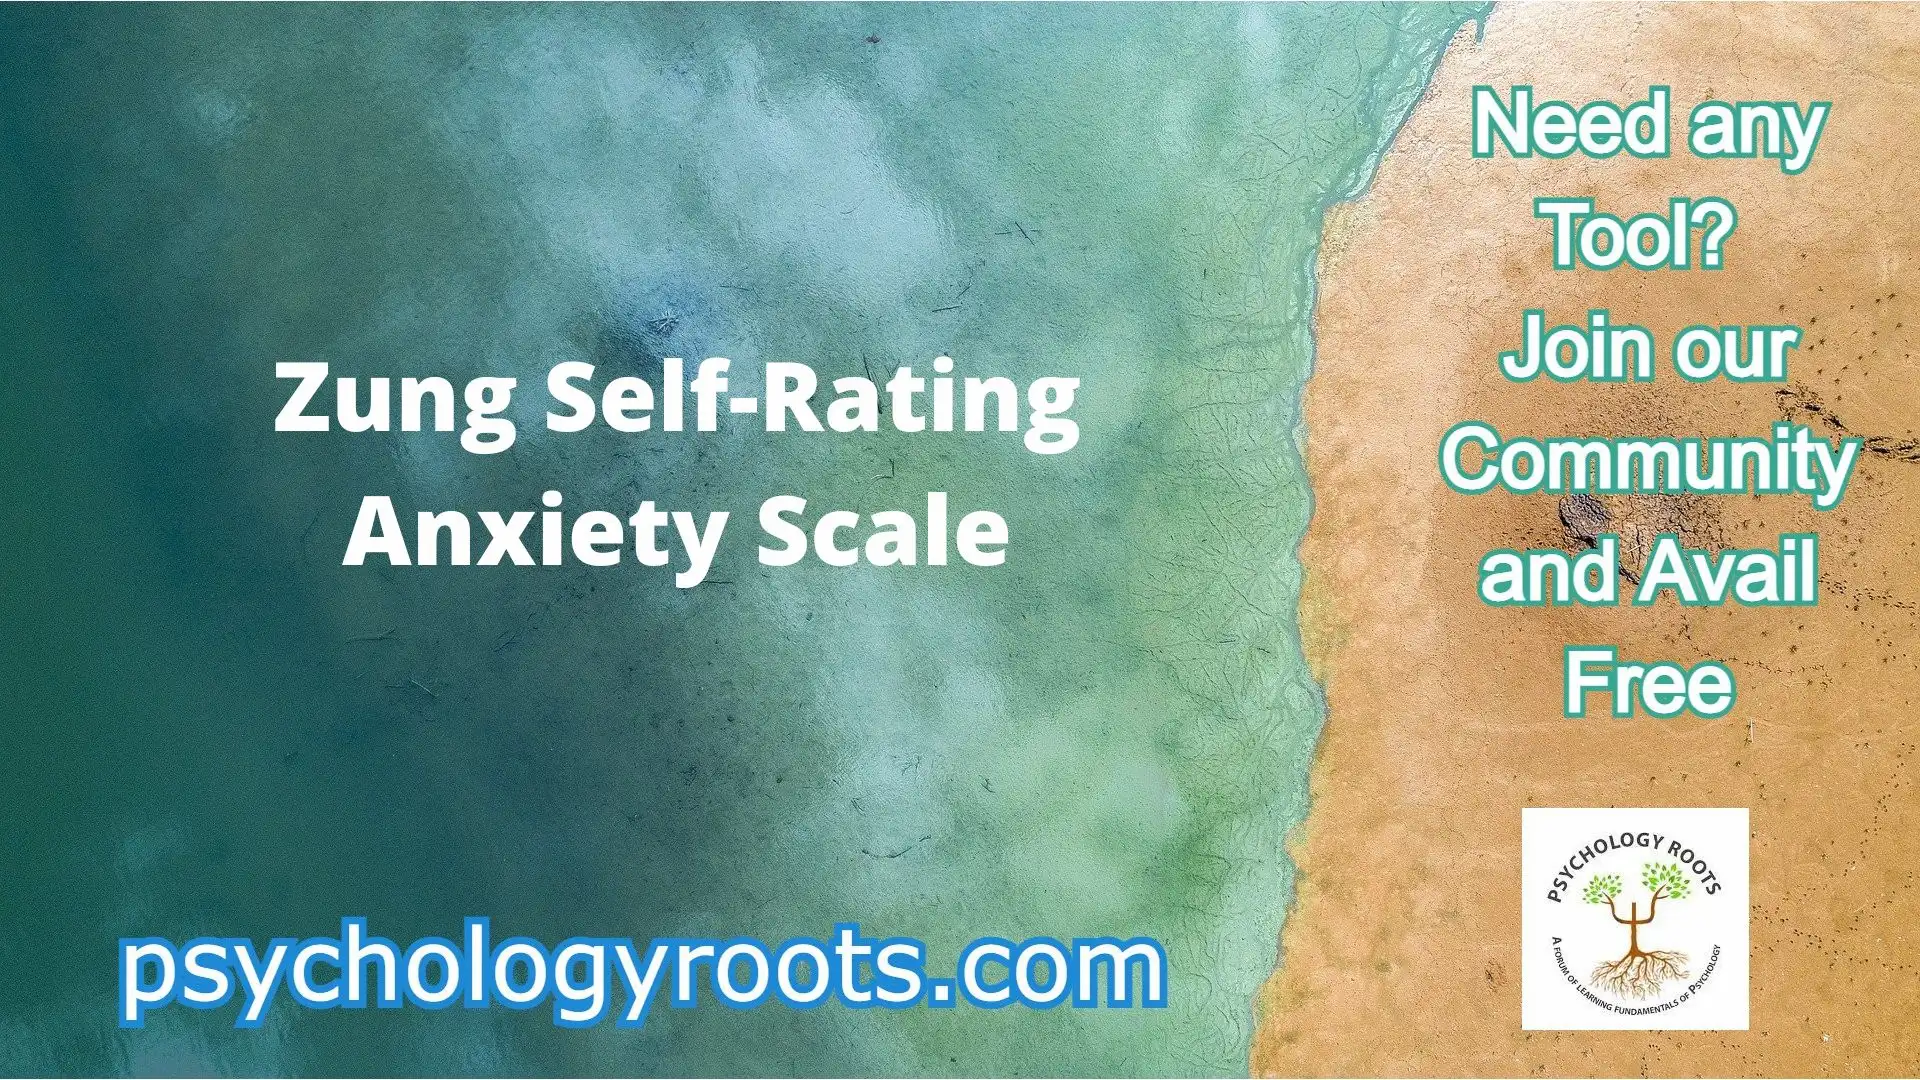 Zung Self-Rating Anxiety Scale